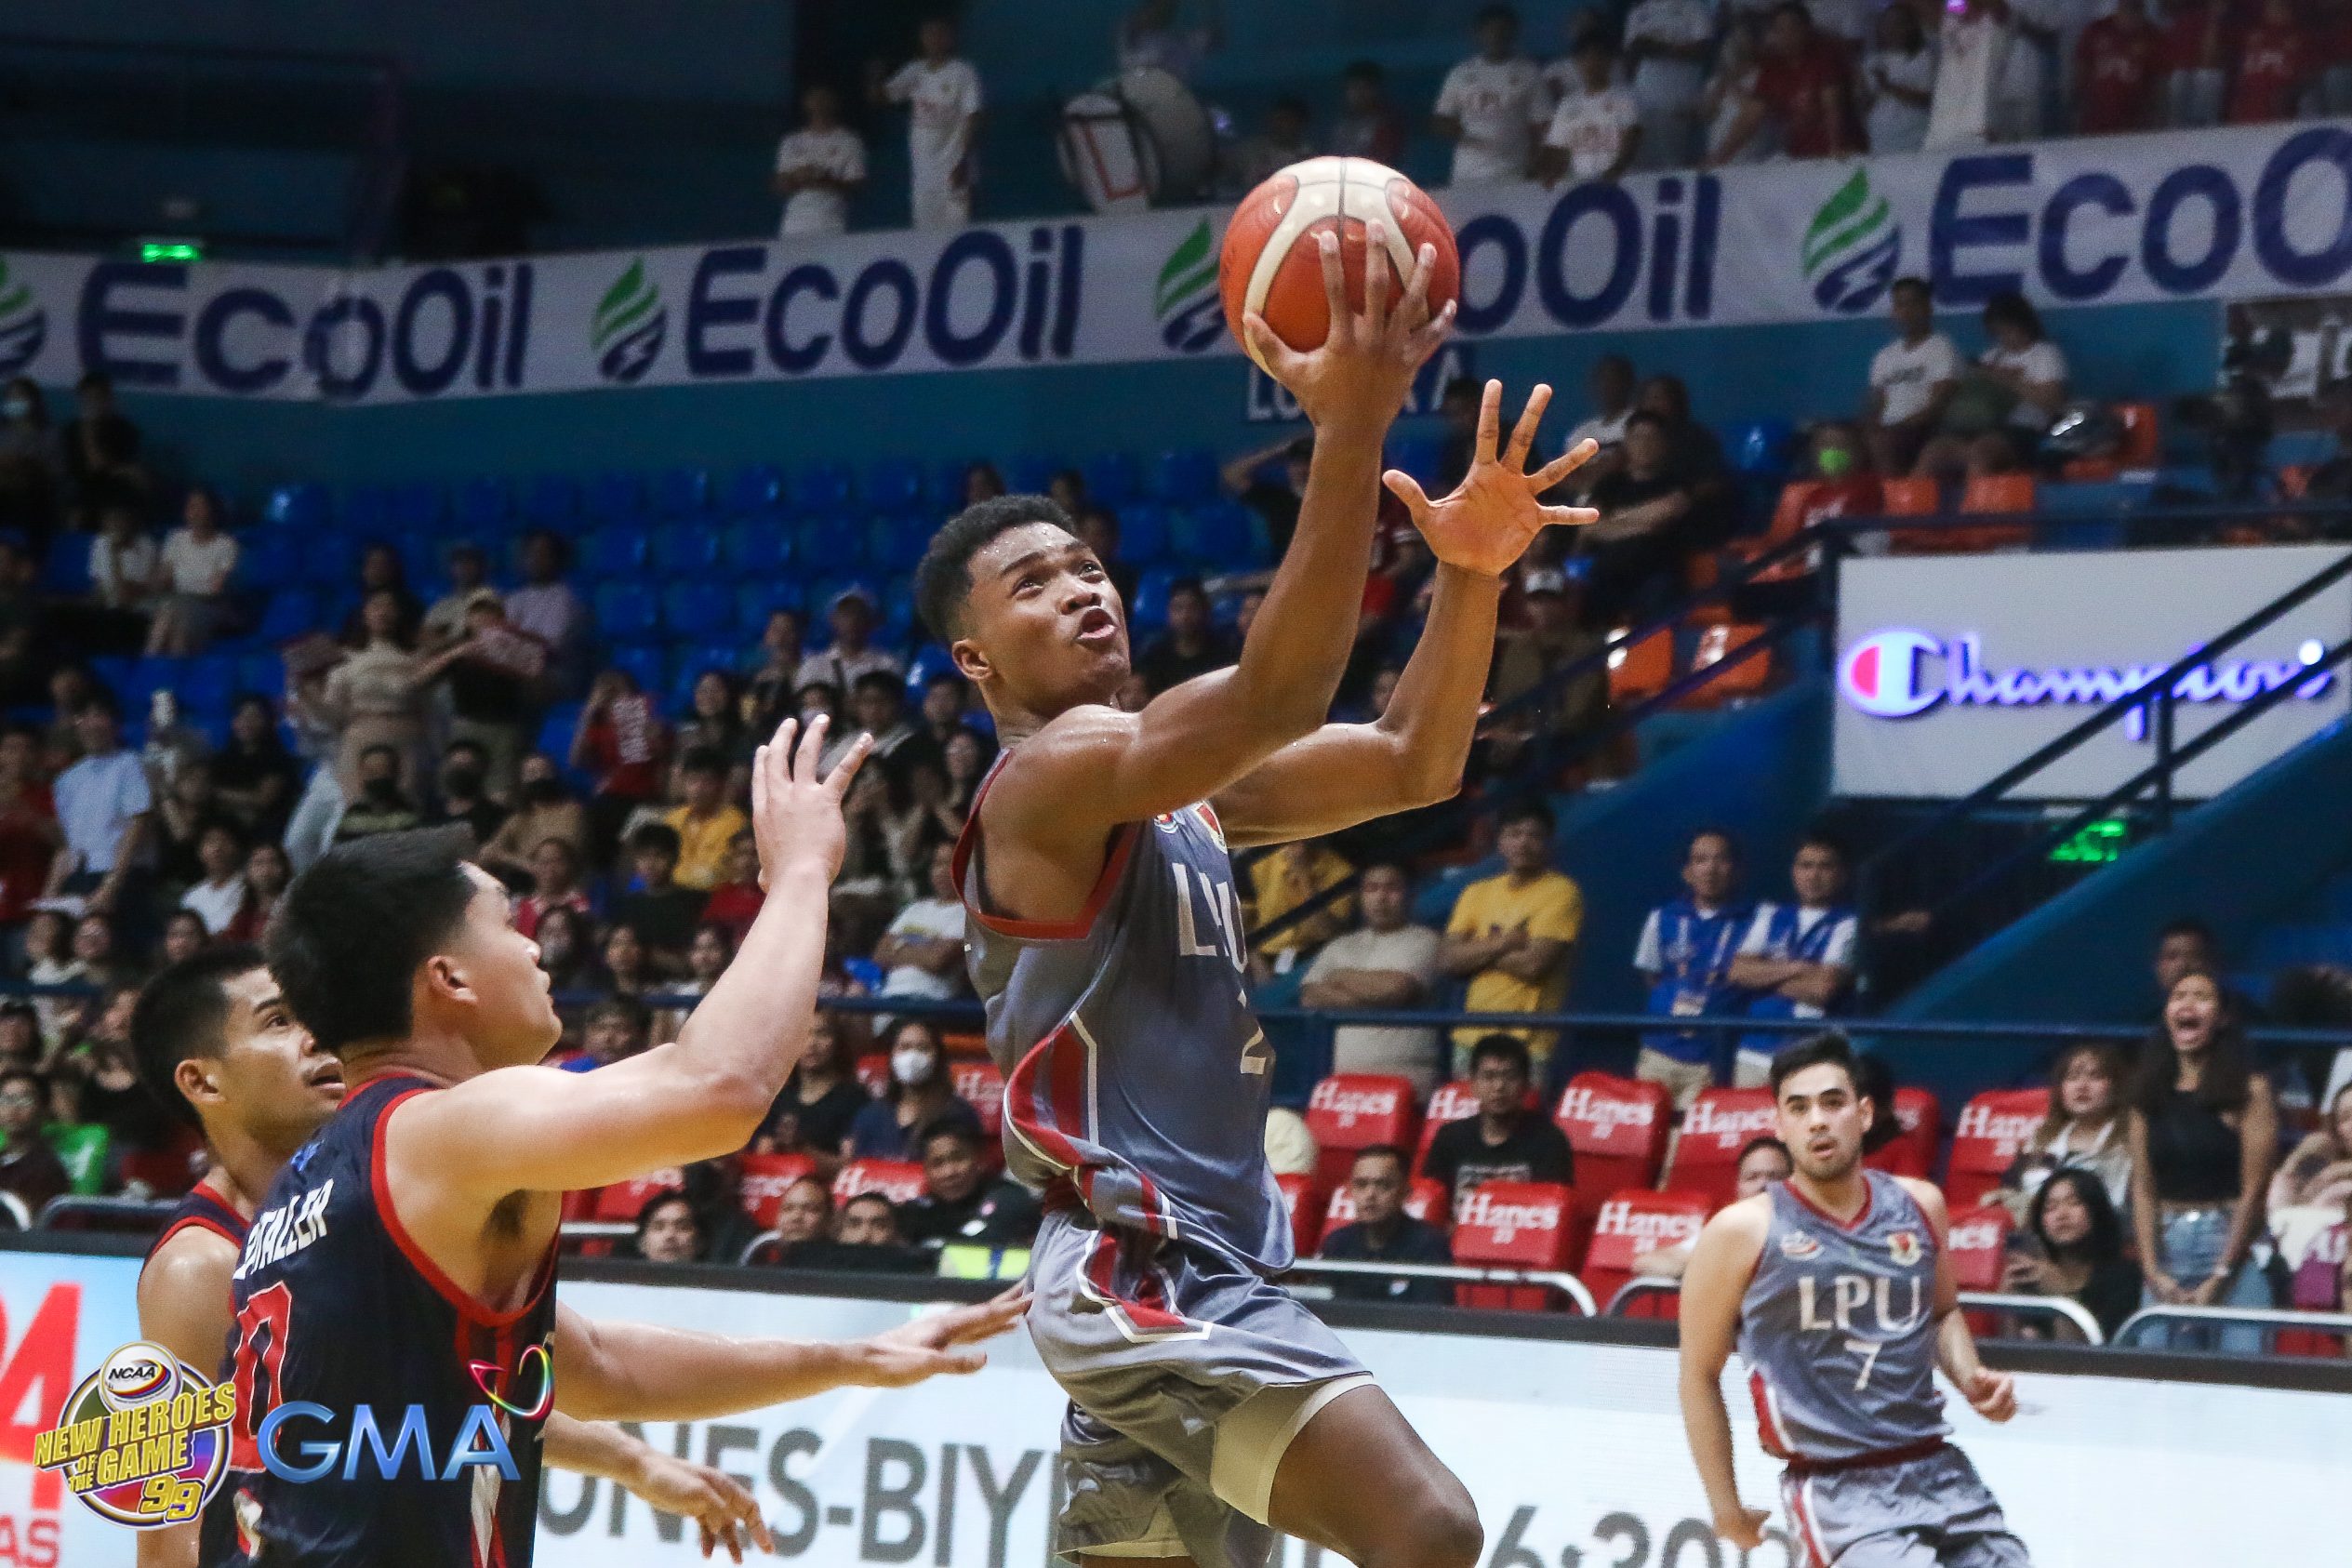 LPU, Mapua down foes to stay tied at No. 1; San Beda snaps 2-game skid